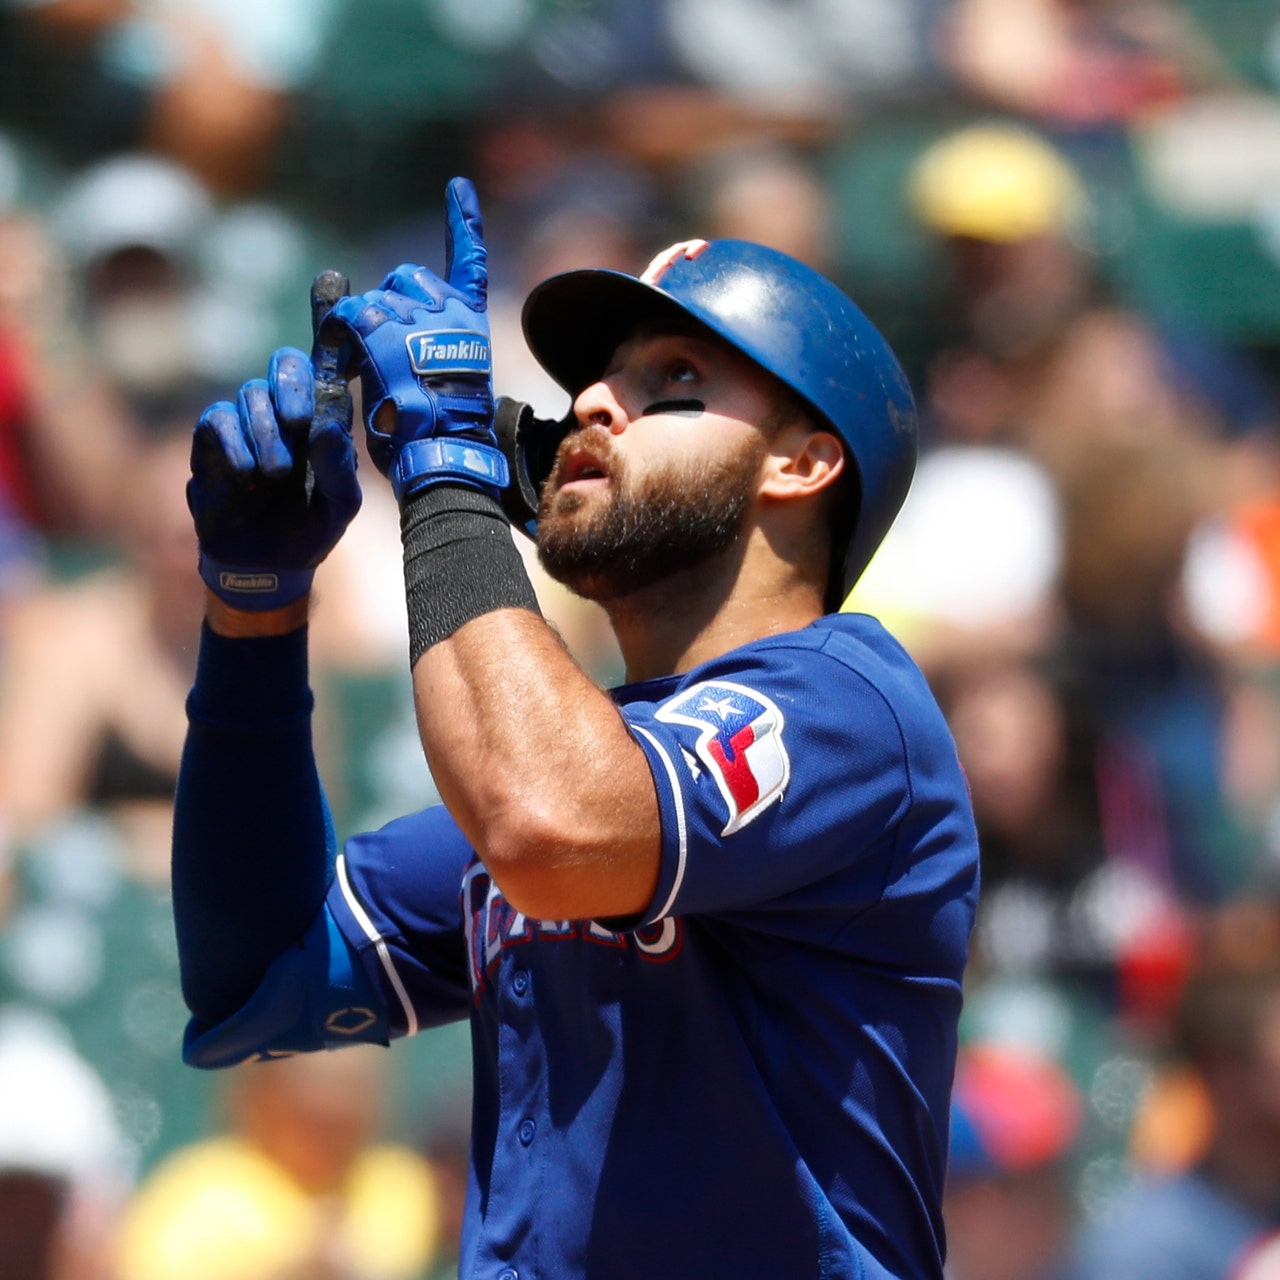 Joey Gallo homers twice in win over Athletics